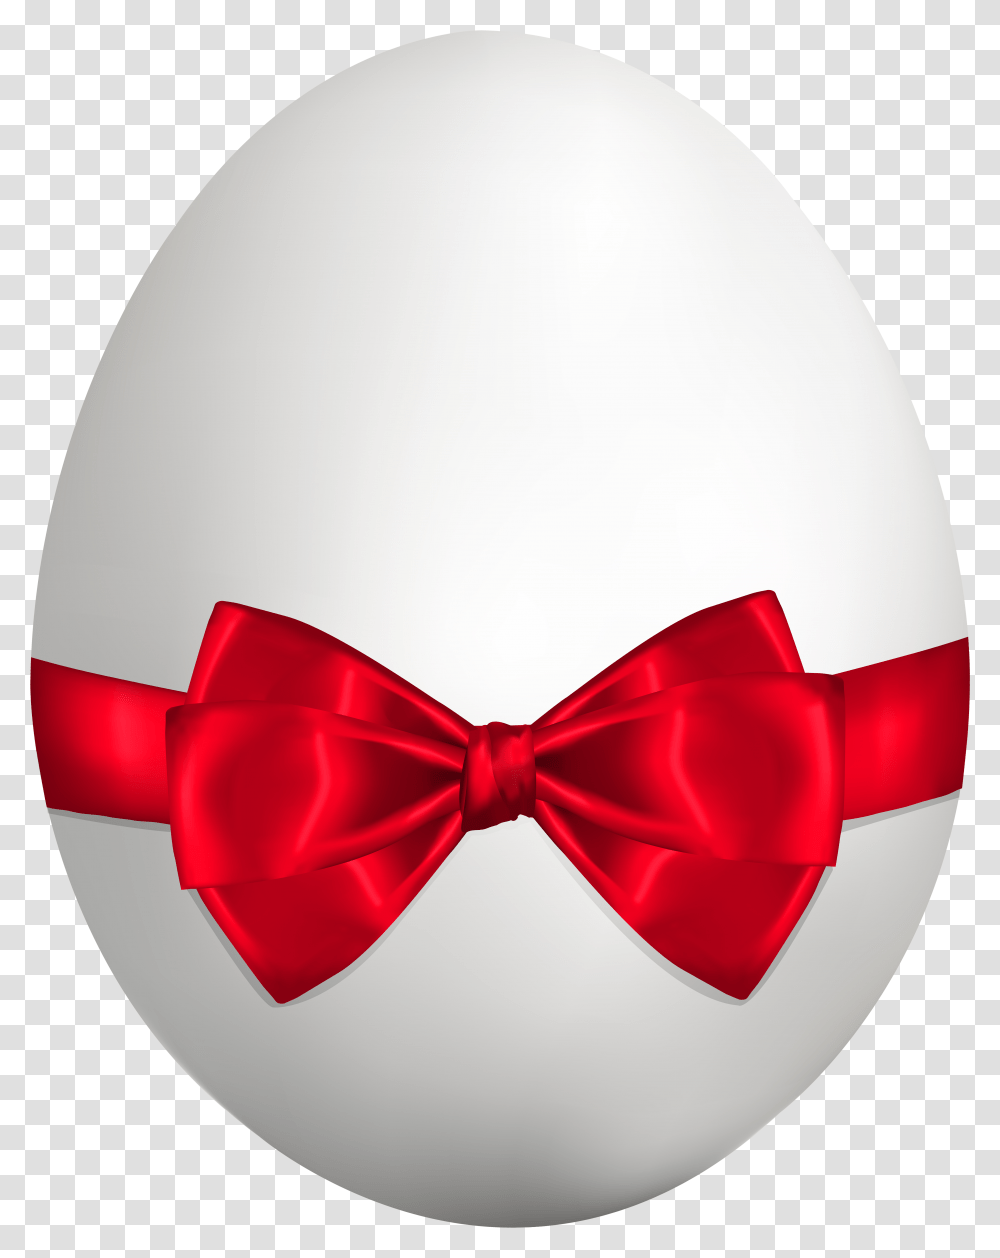 White Easter Egg With Red Bow Clip Art Image Easter Egg Bow Tie, Accessories, Accessory, Necktie, Balloon Transparent Png